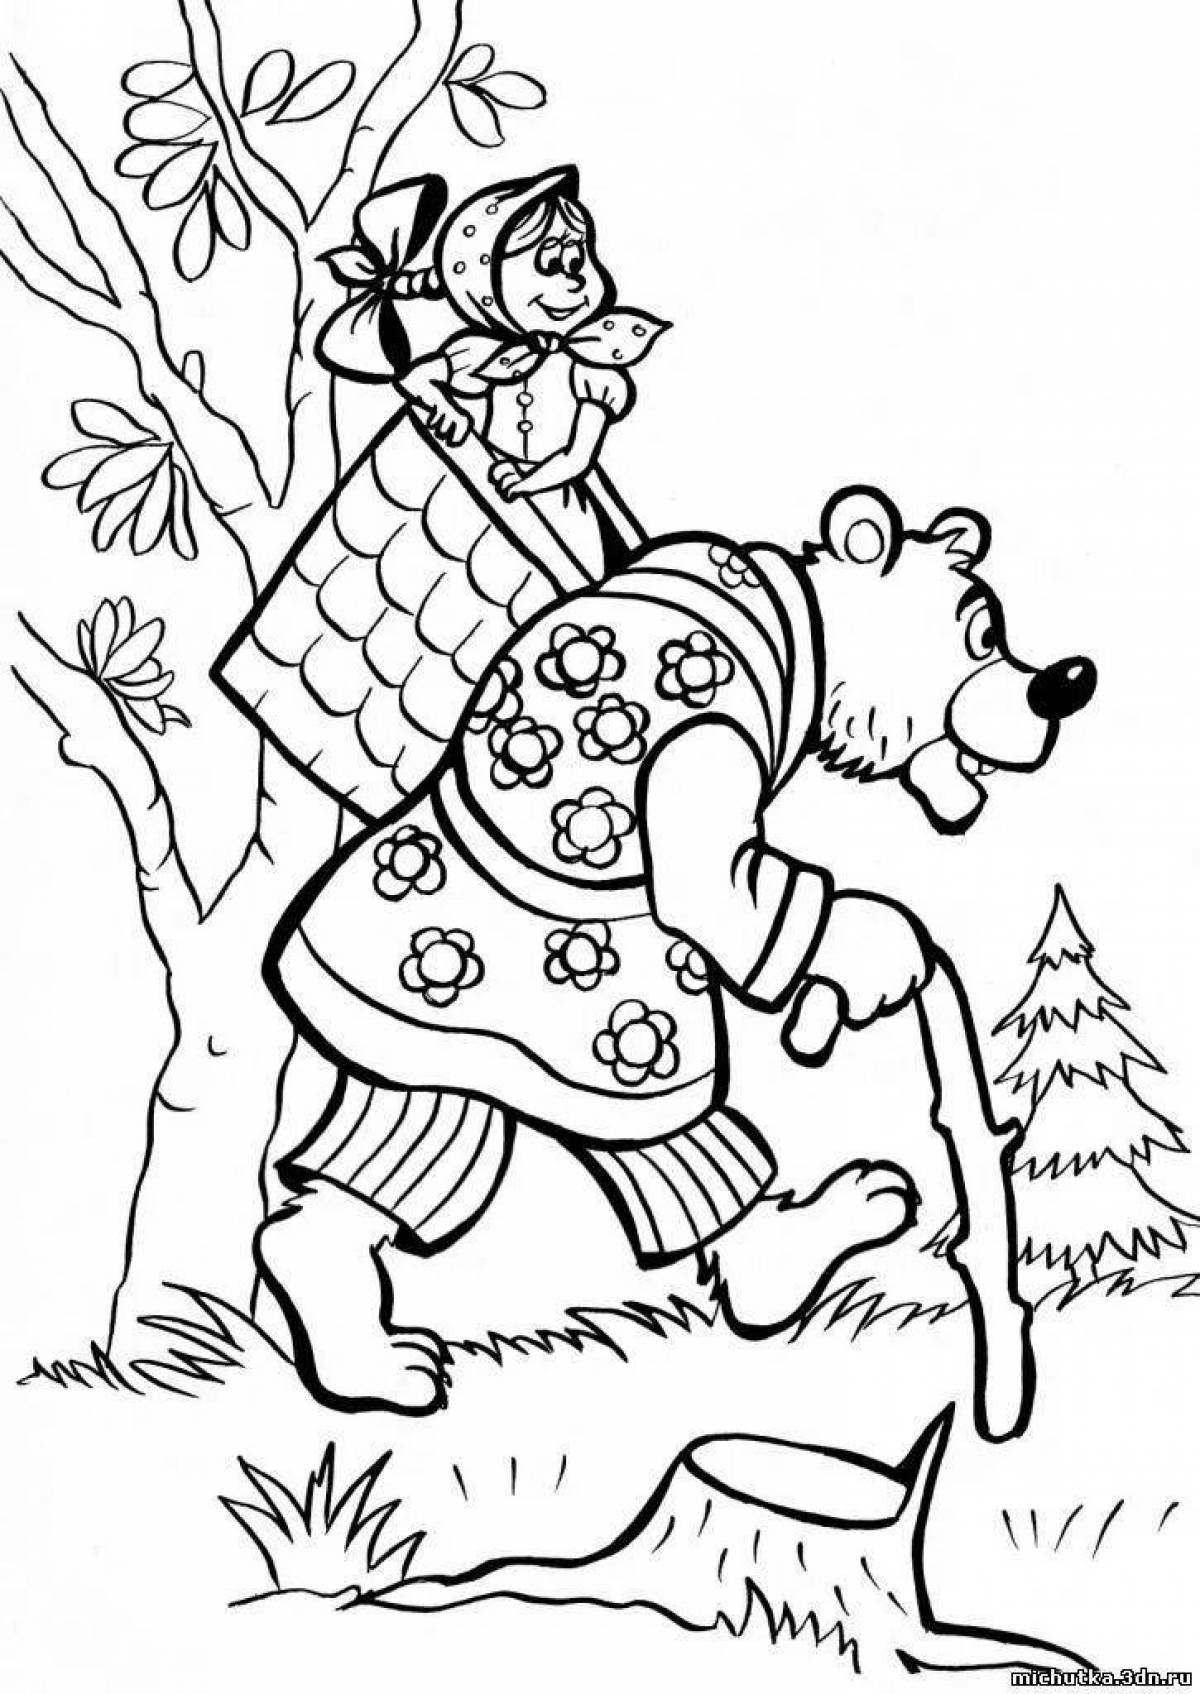 Ornate coloring book heroes of Russian fairy tales